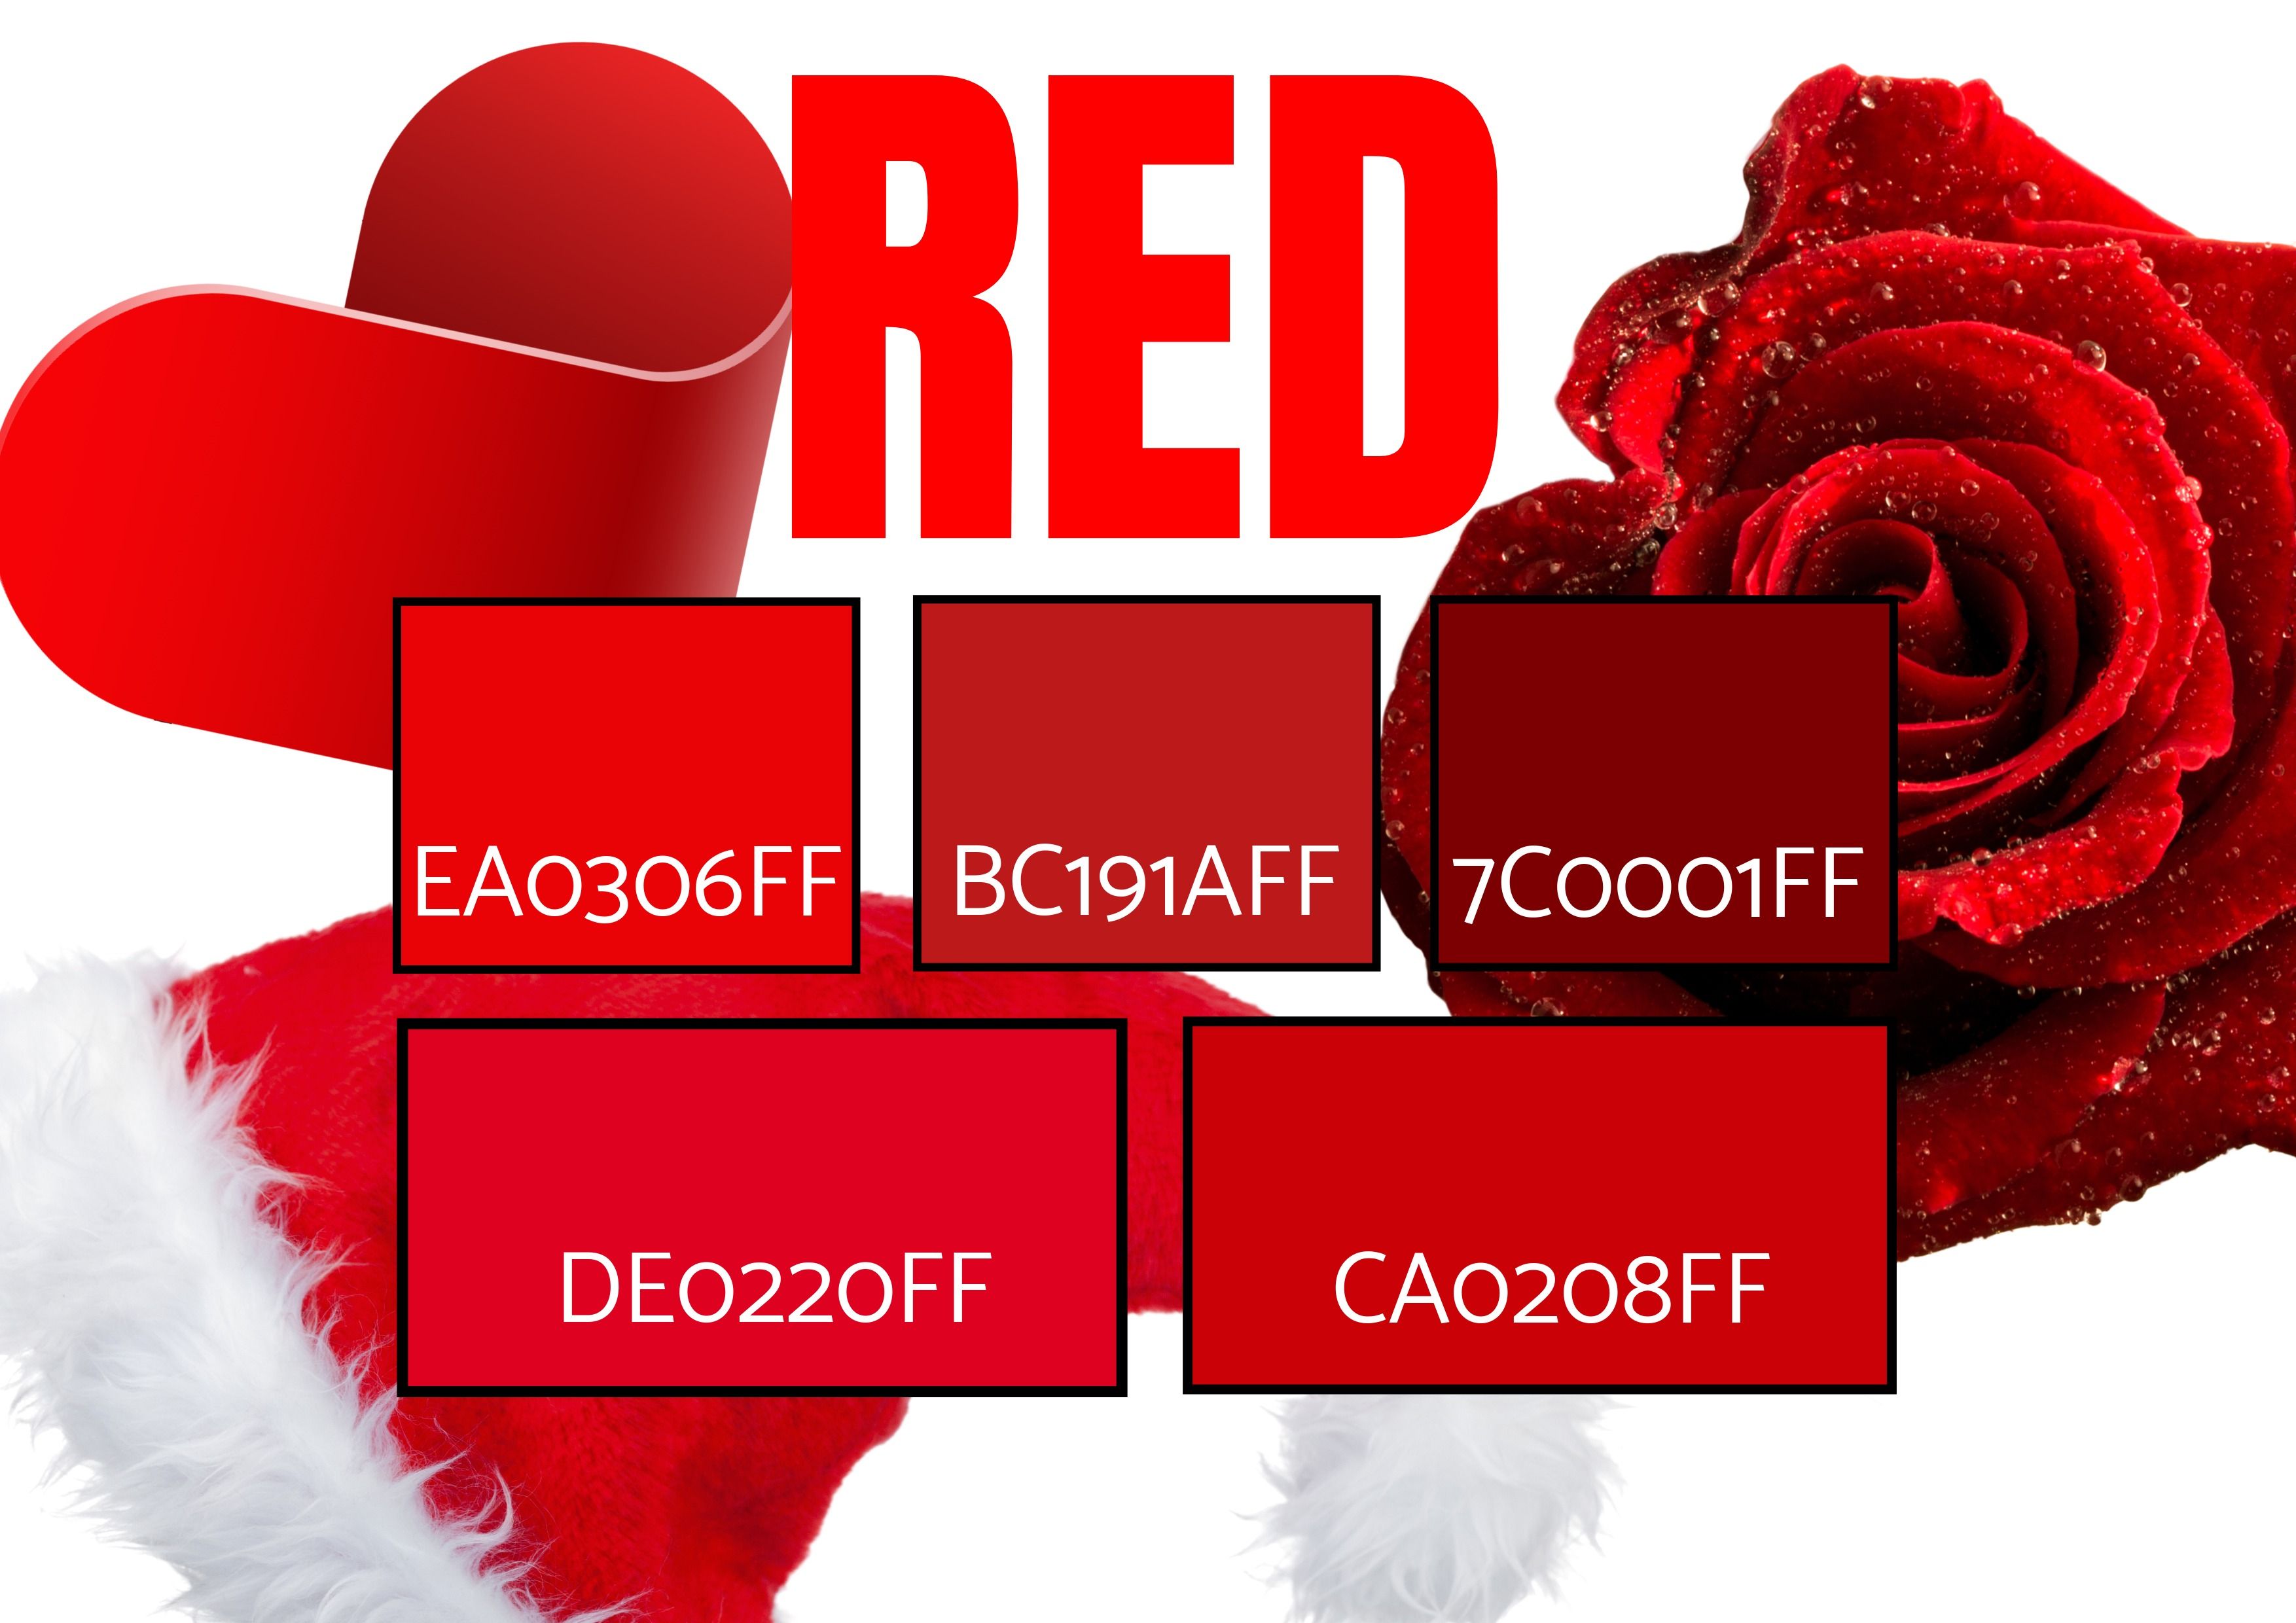 Selection of 5 Red Shades with images of a heart icon, rose and a santa hat - symbolism - Color theory for designers: The art of using color symbolism - Image